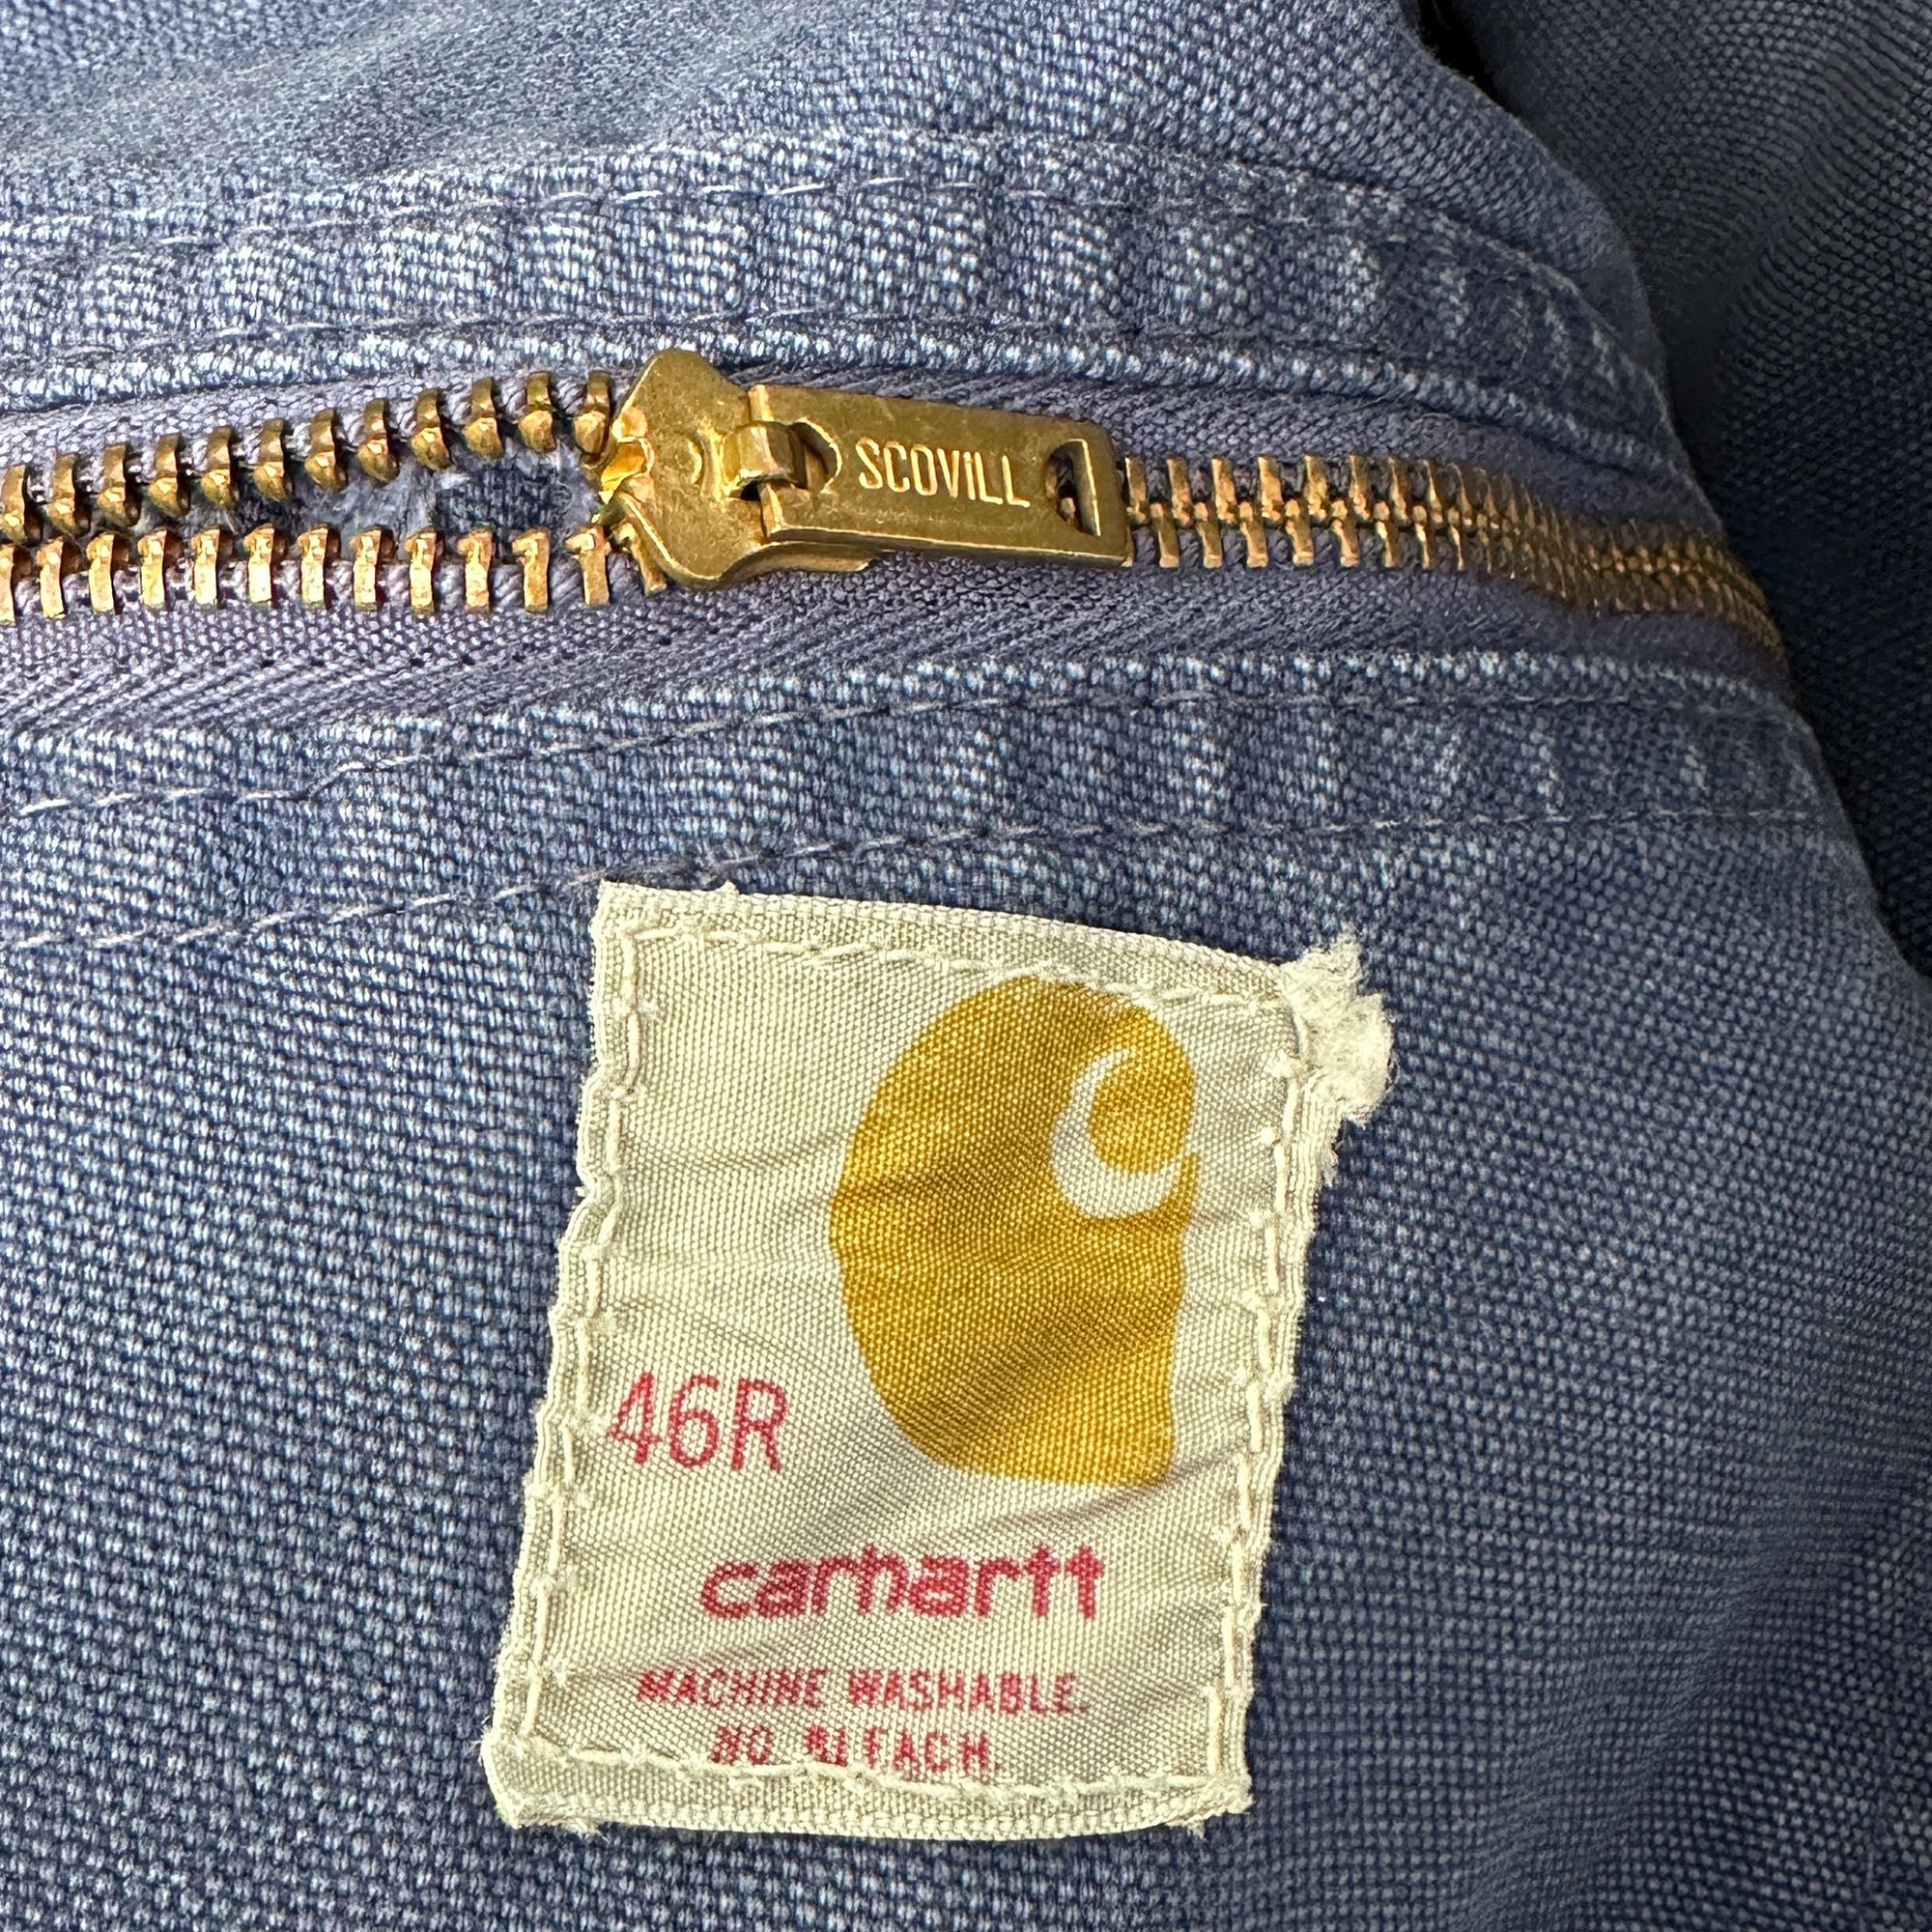 Vintage 70s Carhartt Insulated Duck Canvas Coveralls 46R Talon Zipper Great Lakes Reclaimed Denim